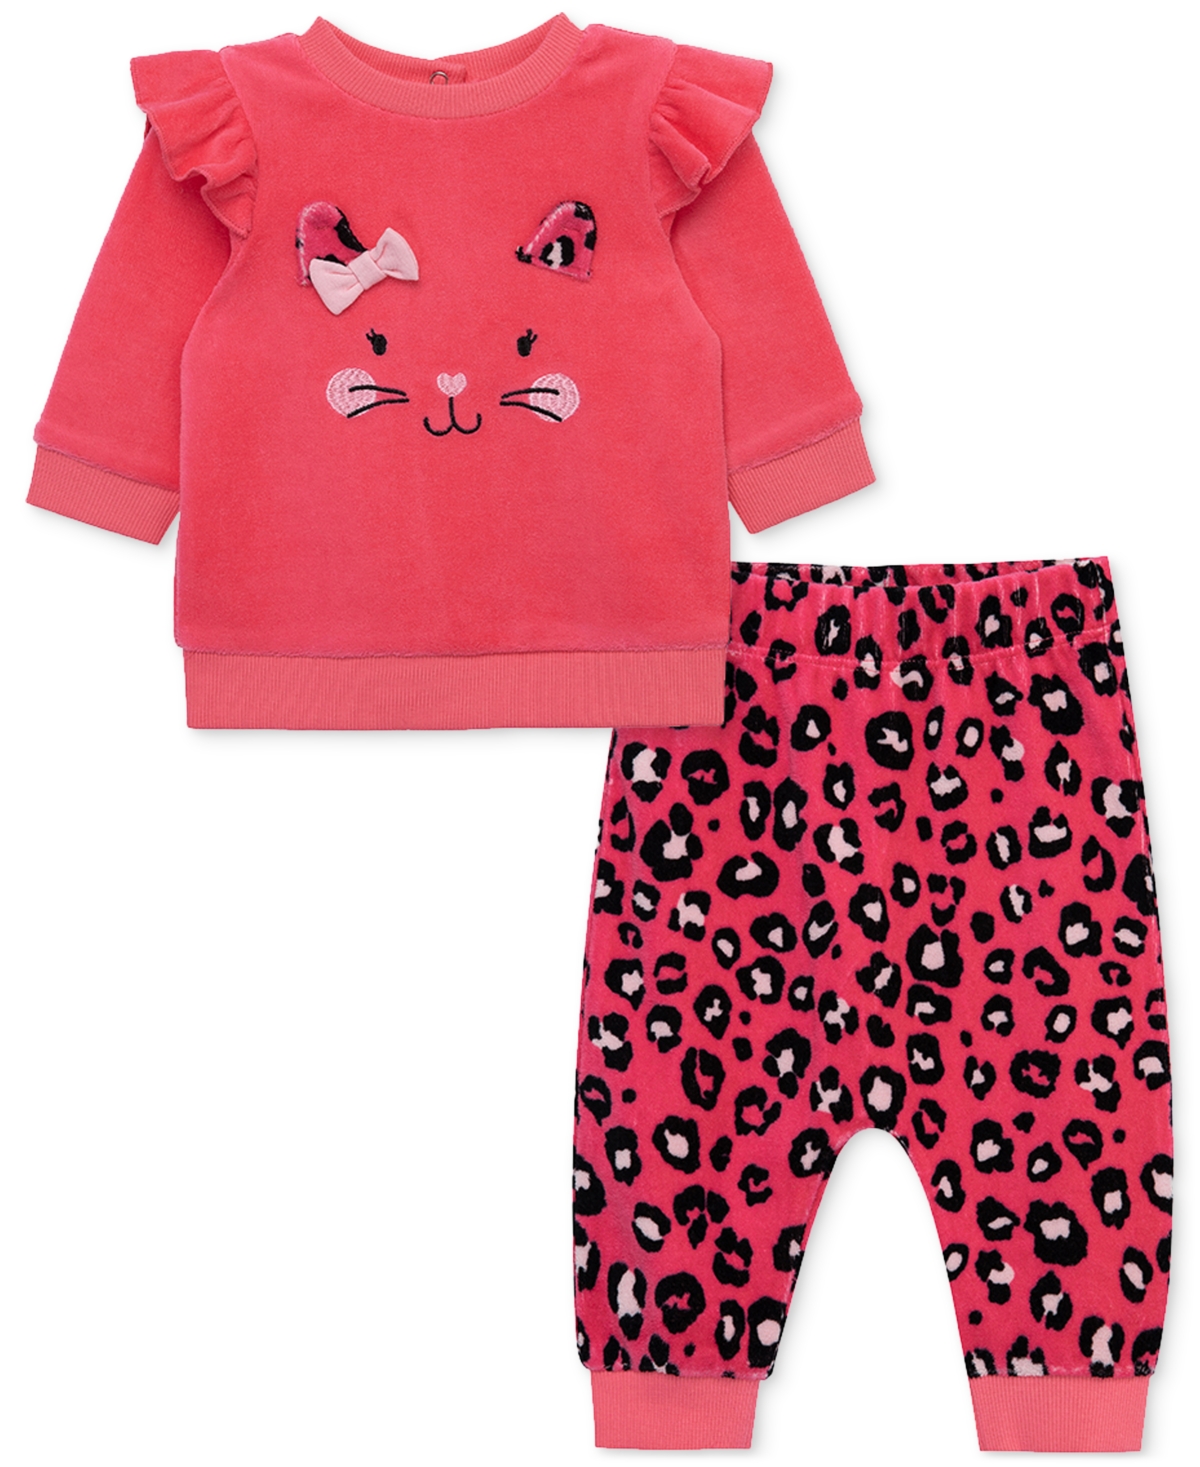 Little Me Baby Girls Leopard Kitty 2-pc. Velour Top & Pants Set In Camelia Rose